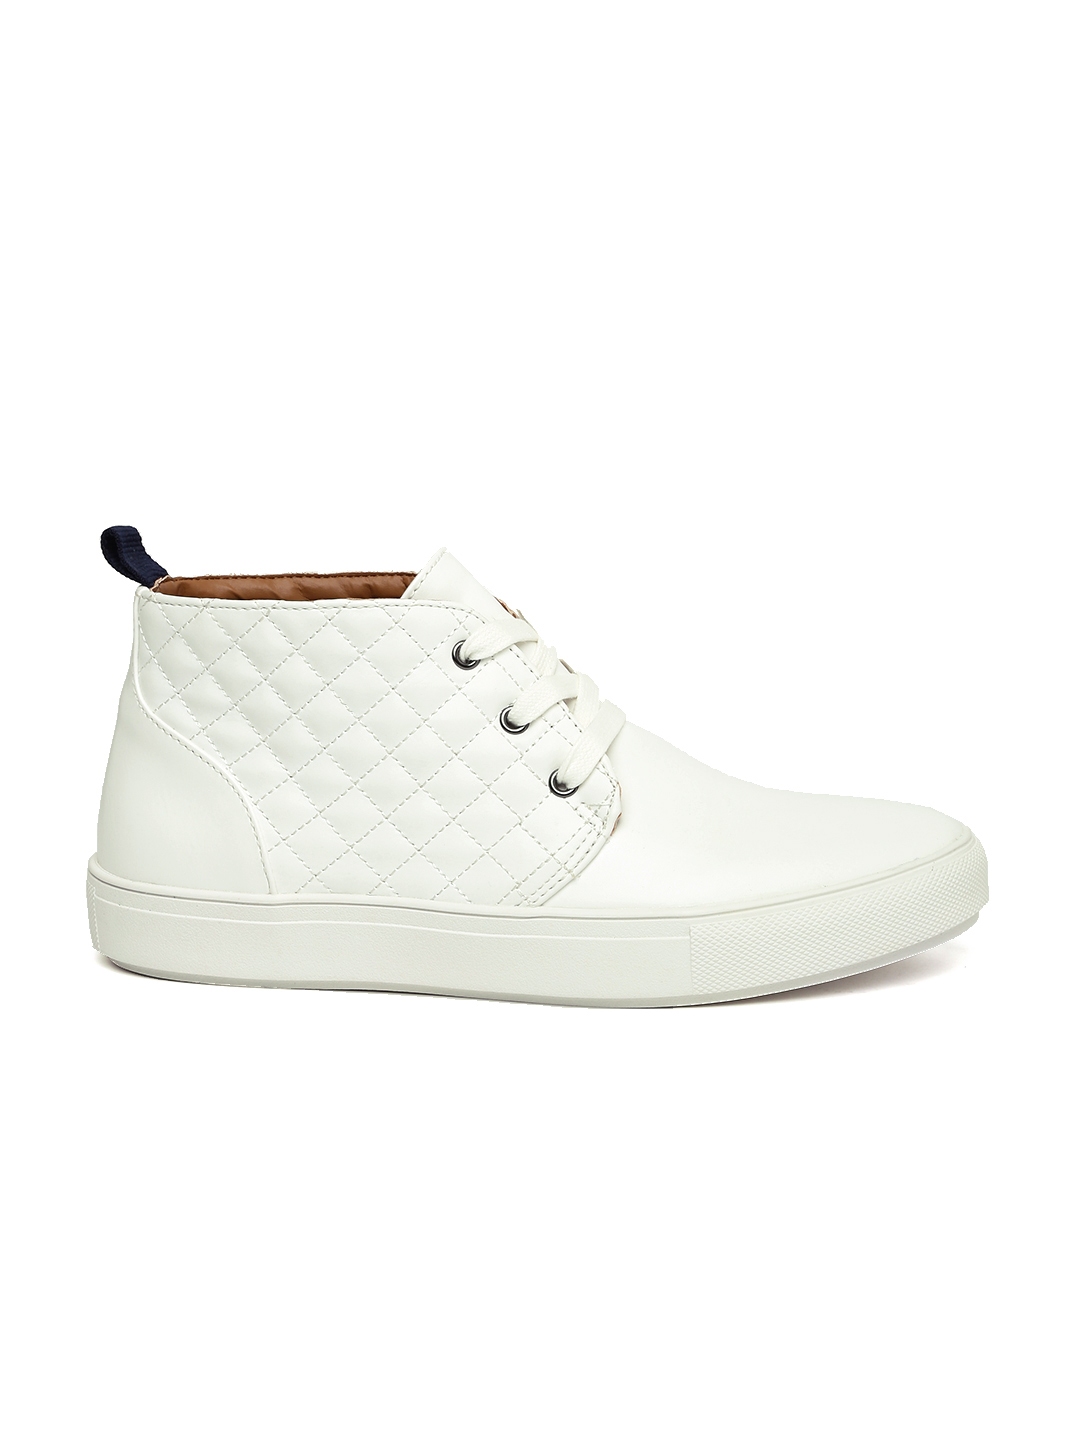 Buy Steve Madden Men White Quilted Mid Top Sneakers - Casual Shoes for ...